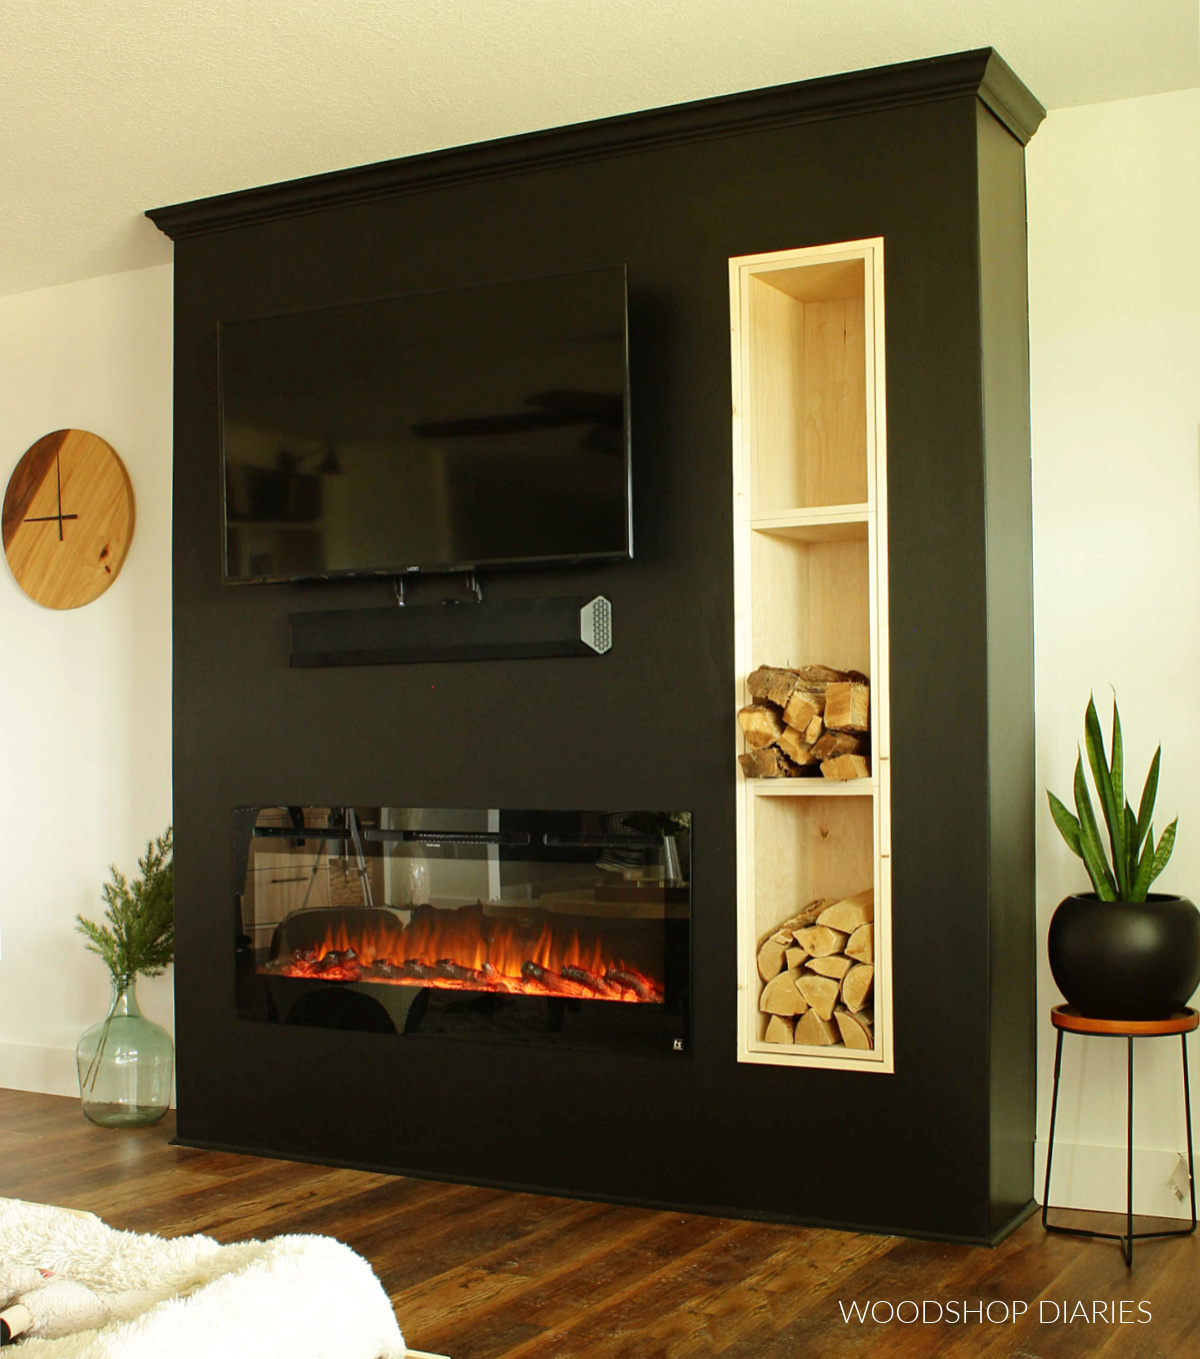 White walls with black DIY electric fireplace wall with TV. Stacked wood cubbies on left side with firewood